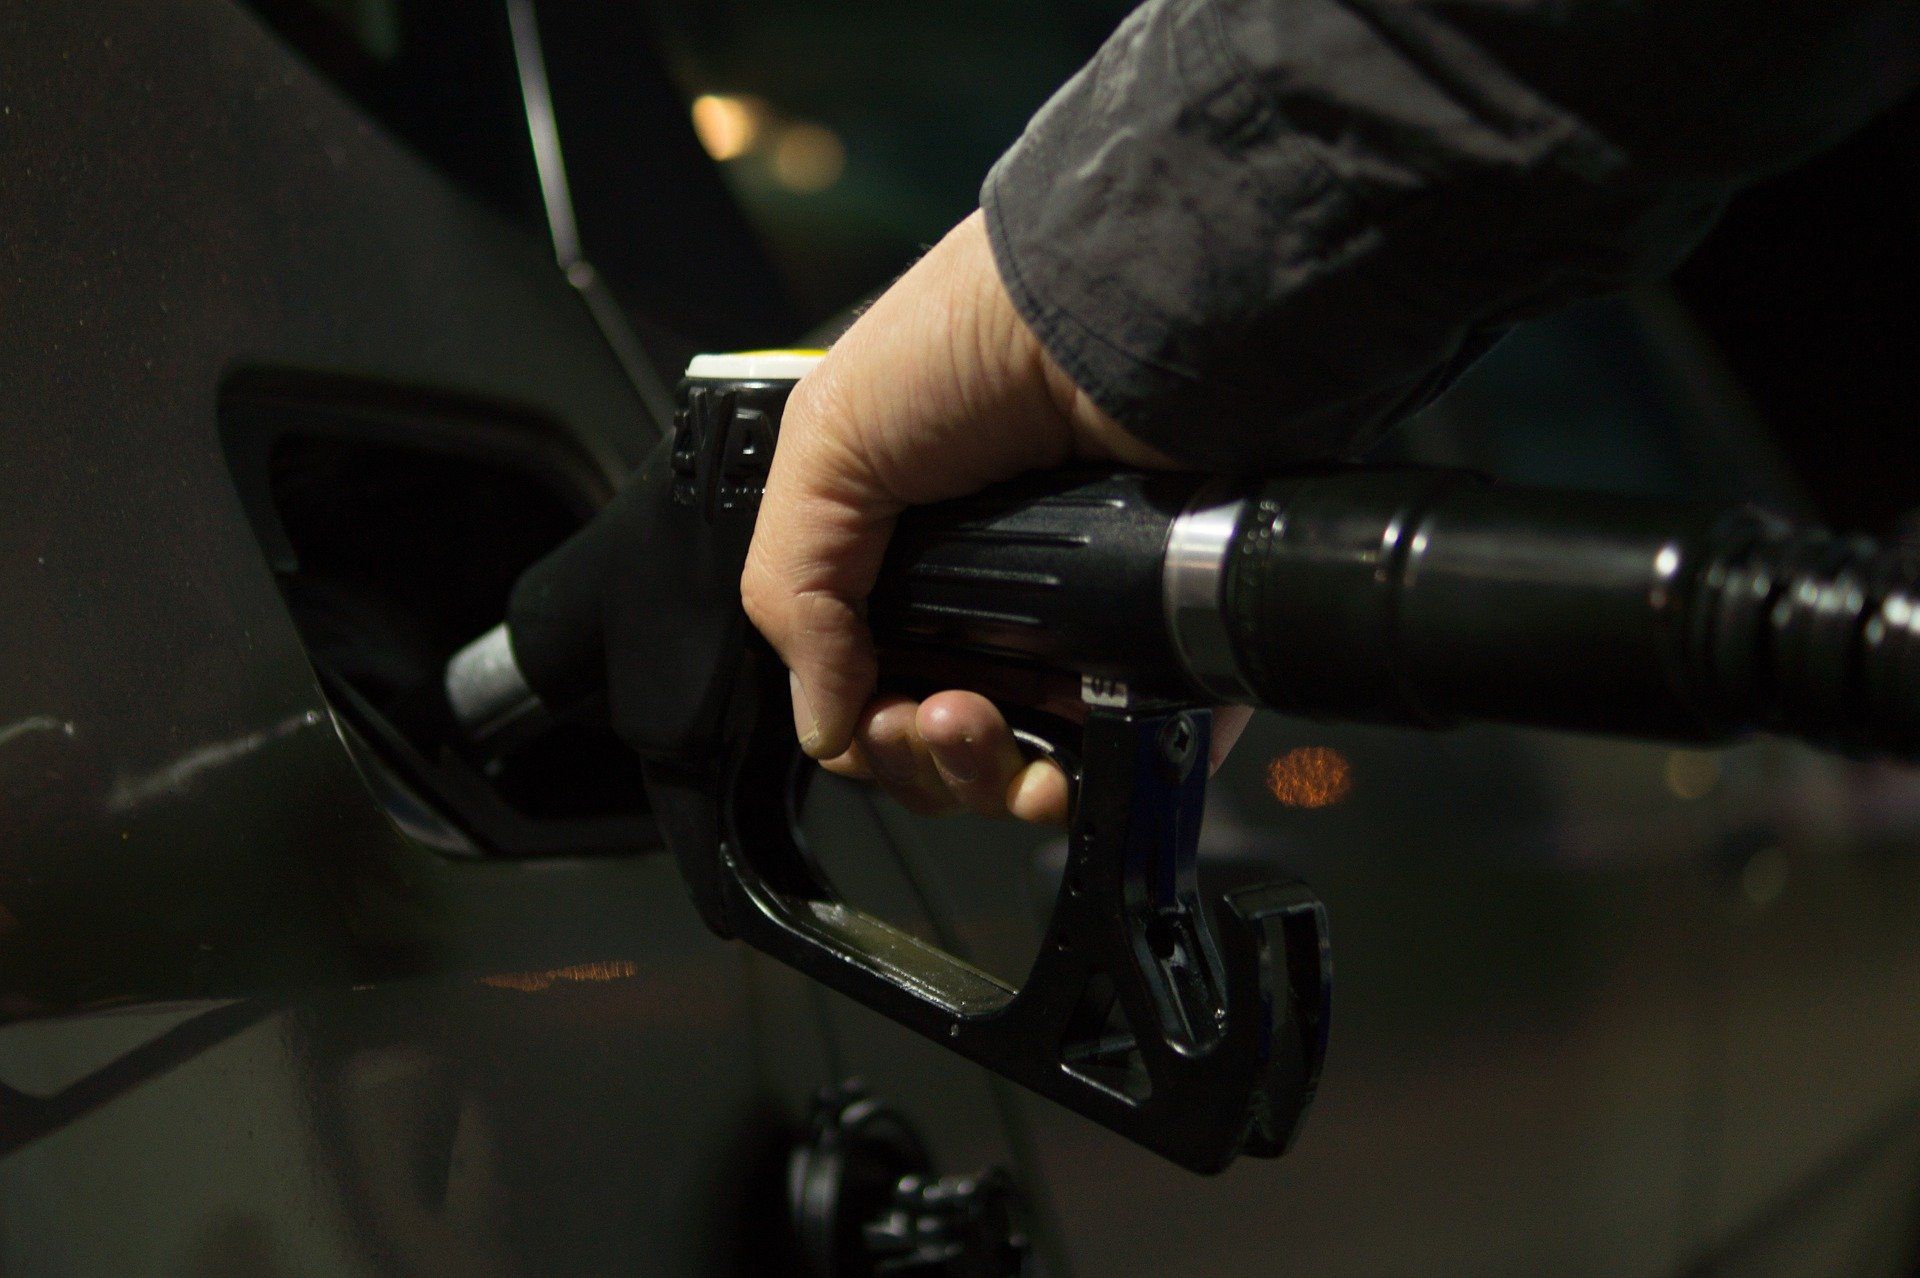 Fuel price today: Petrol and Diesel rates remain unchanged on April 28, 2022